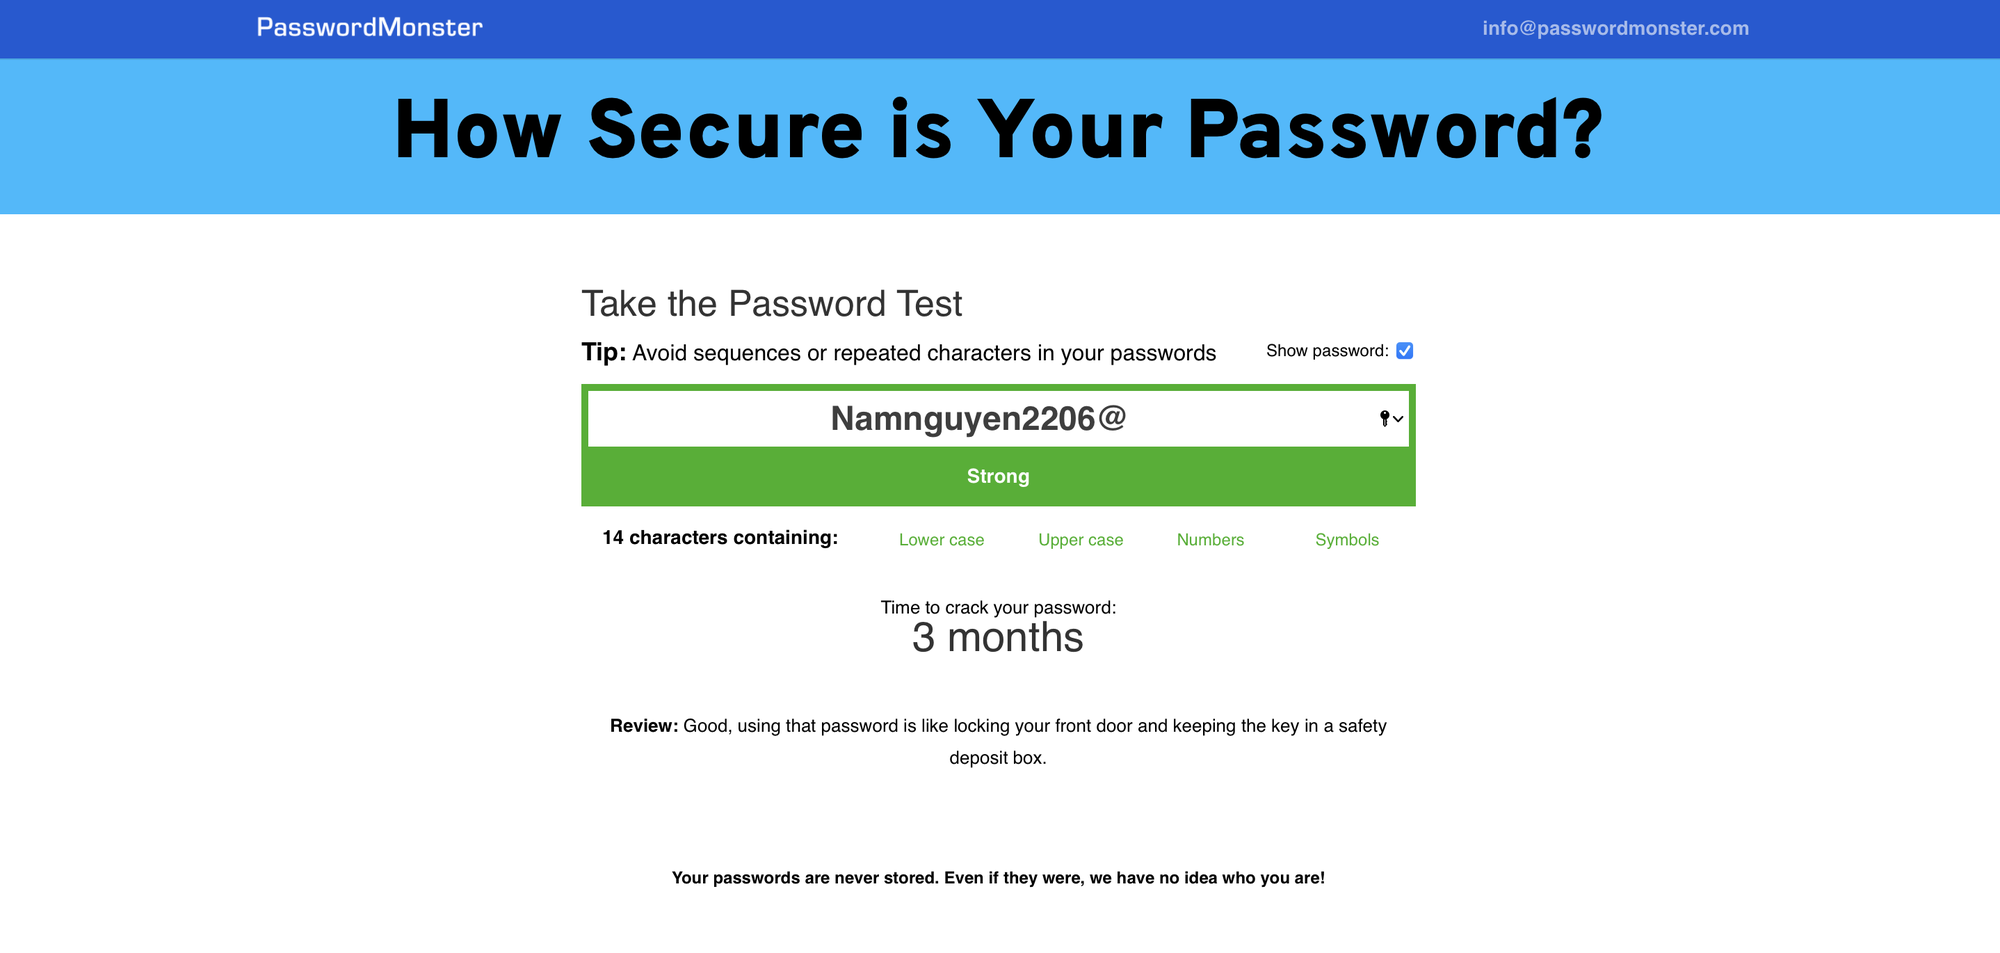 Here's how to check password strength and super password creation tips - Photo 1.